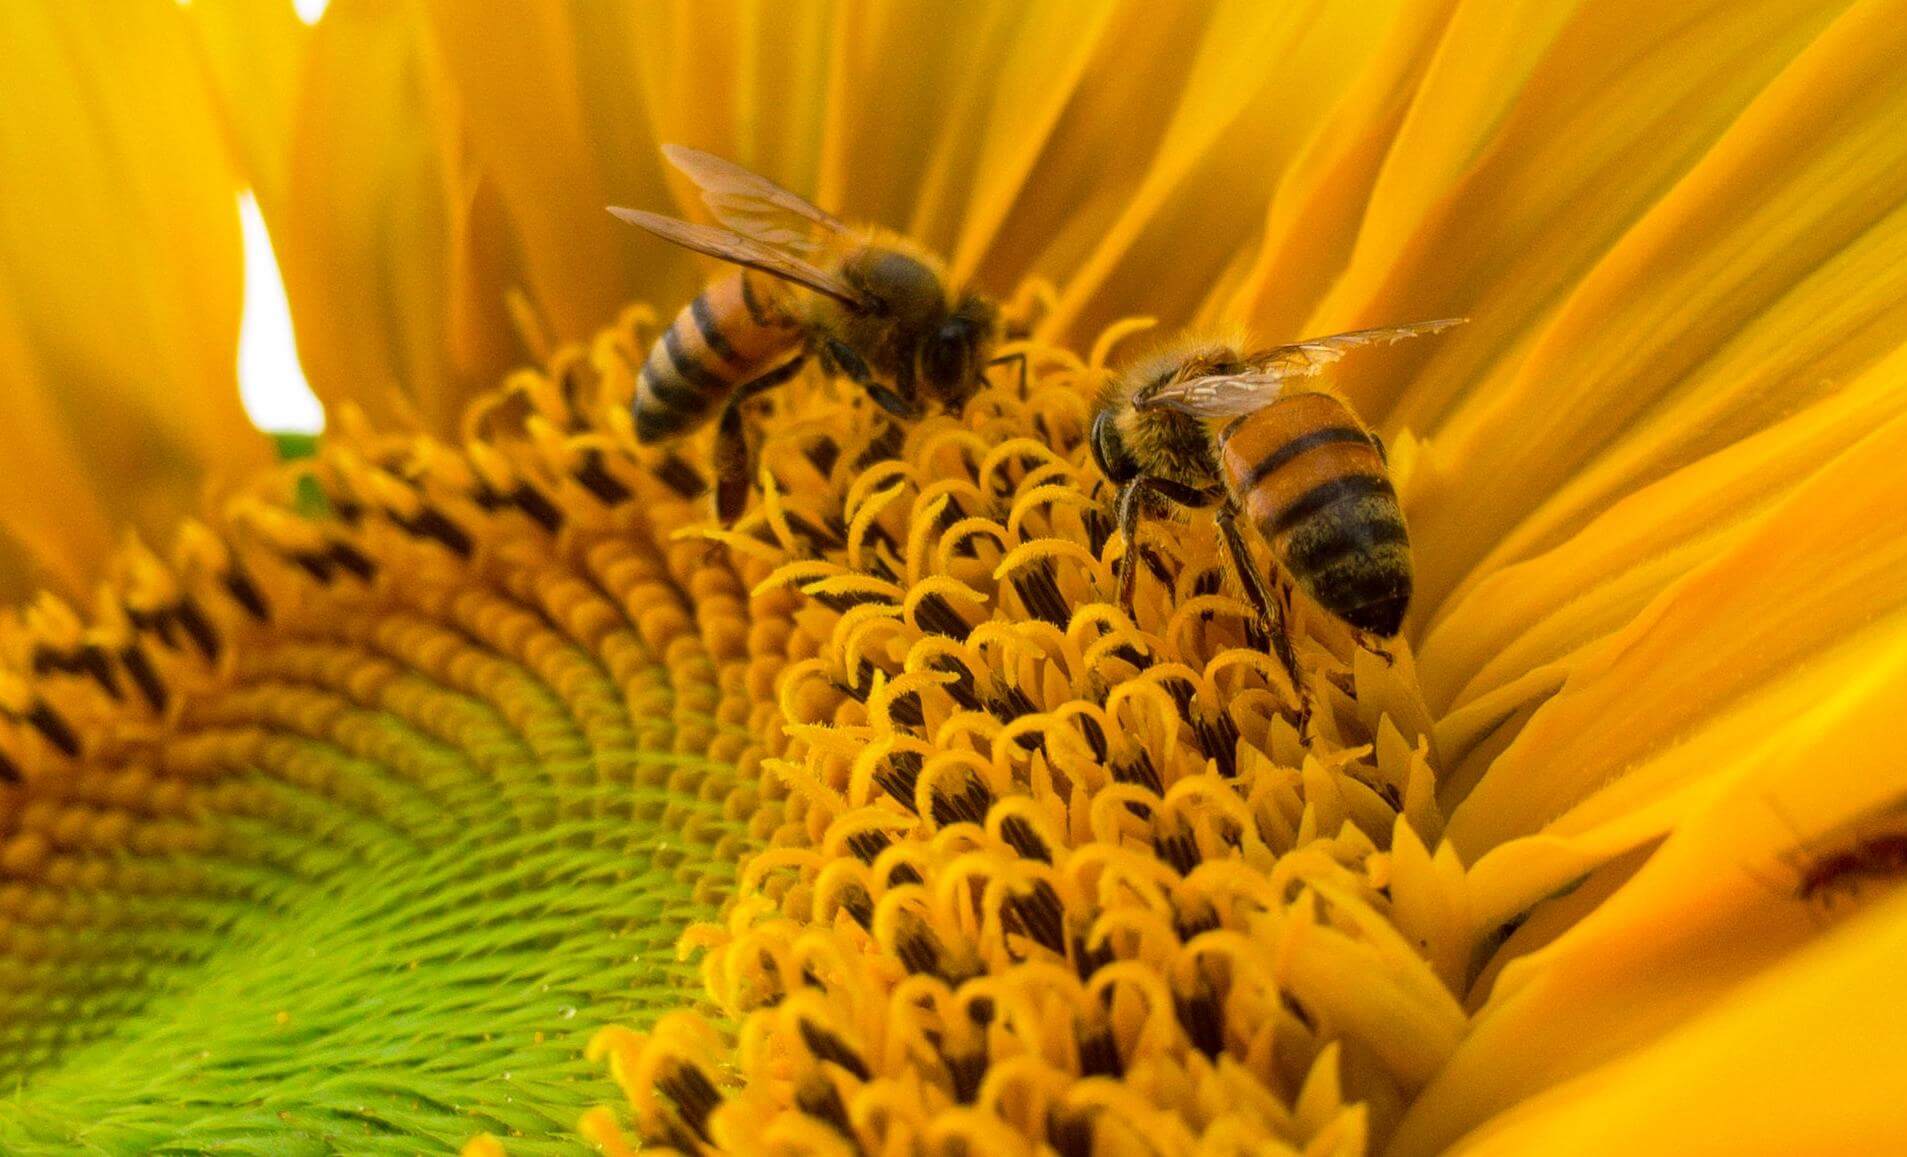 Closeup on two hoenybees investigating the center of a sunflower in bloom - photo